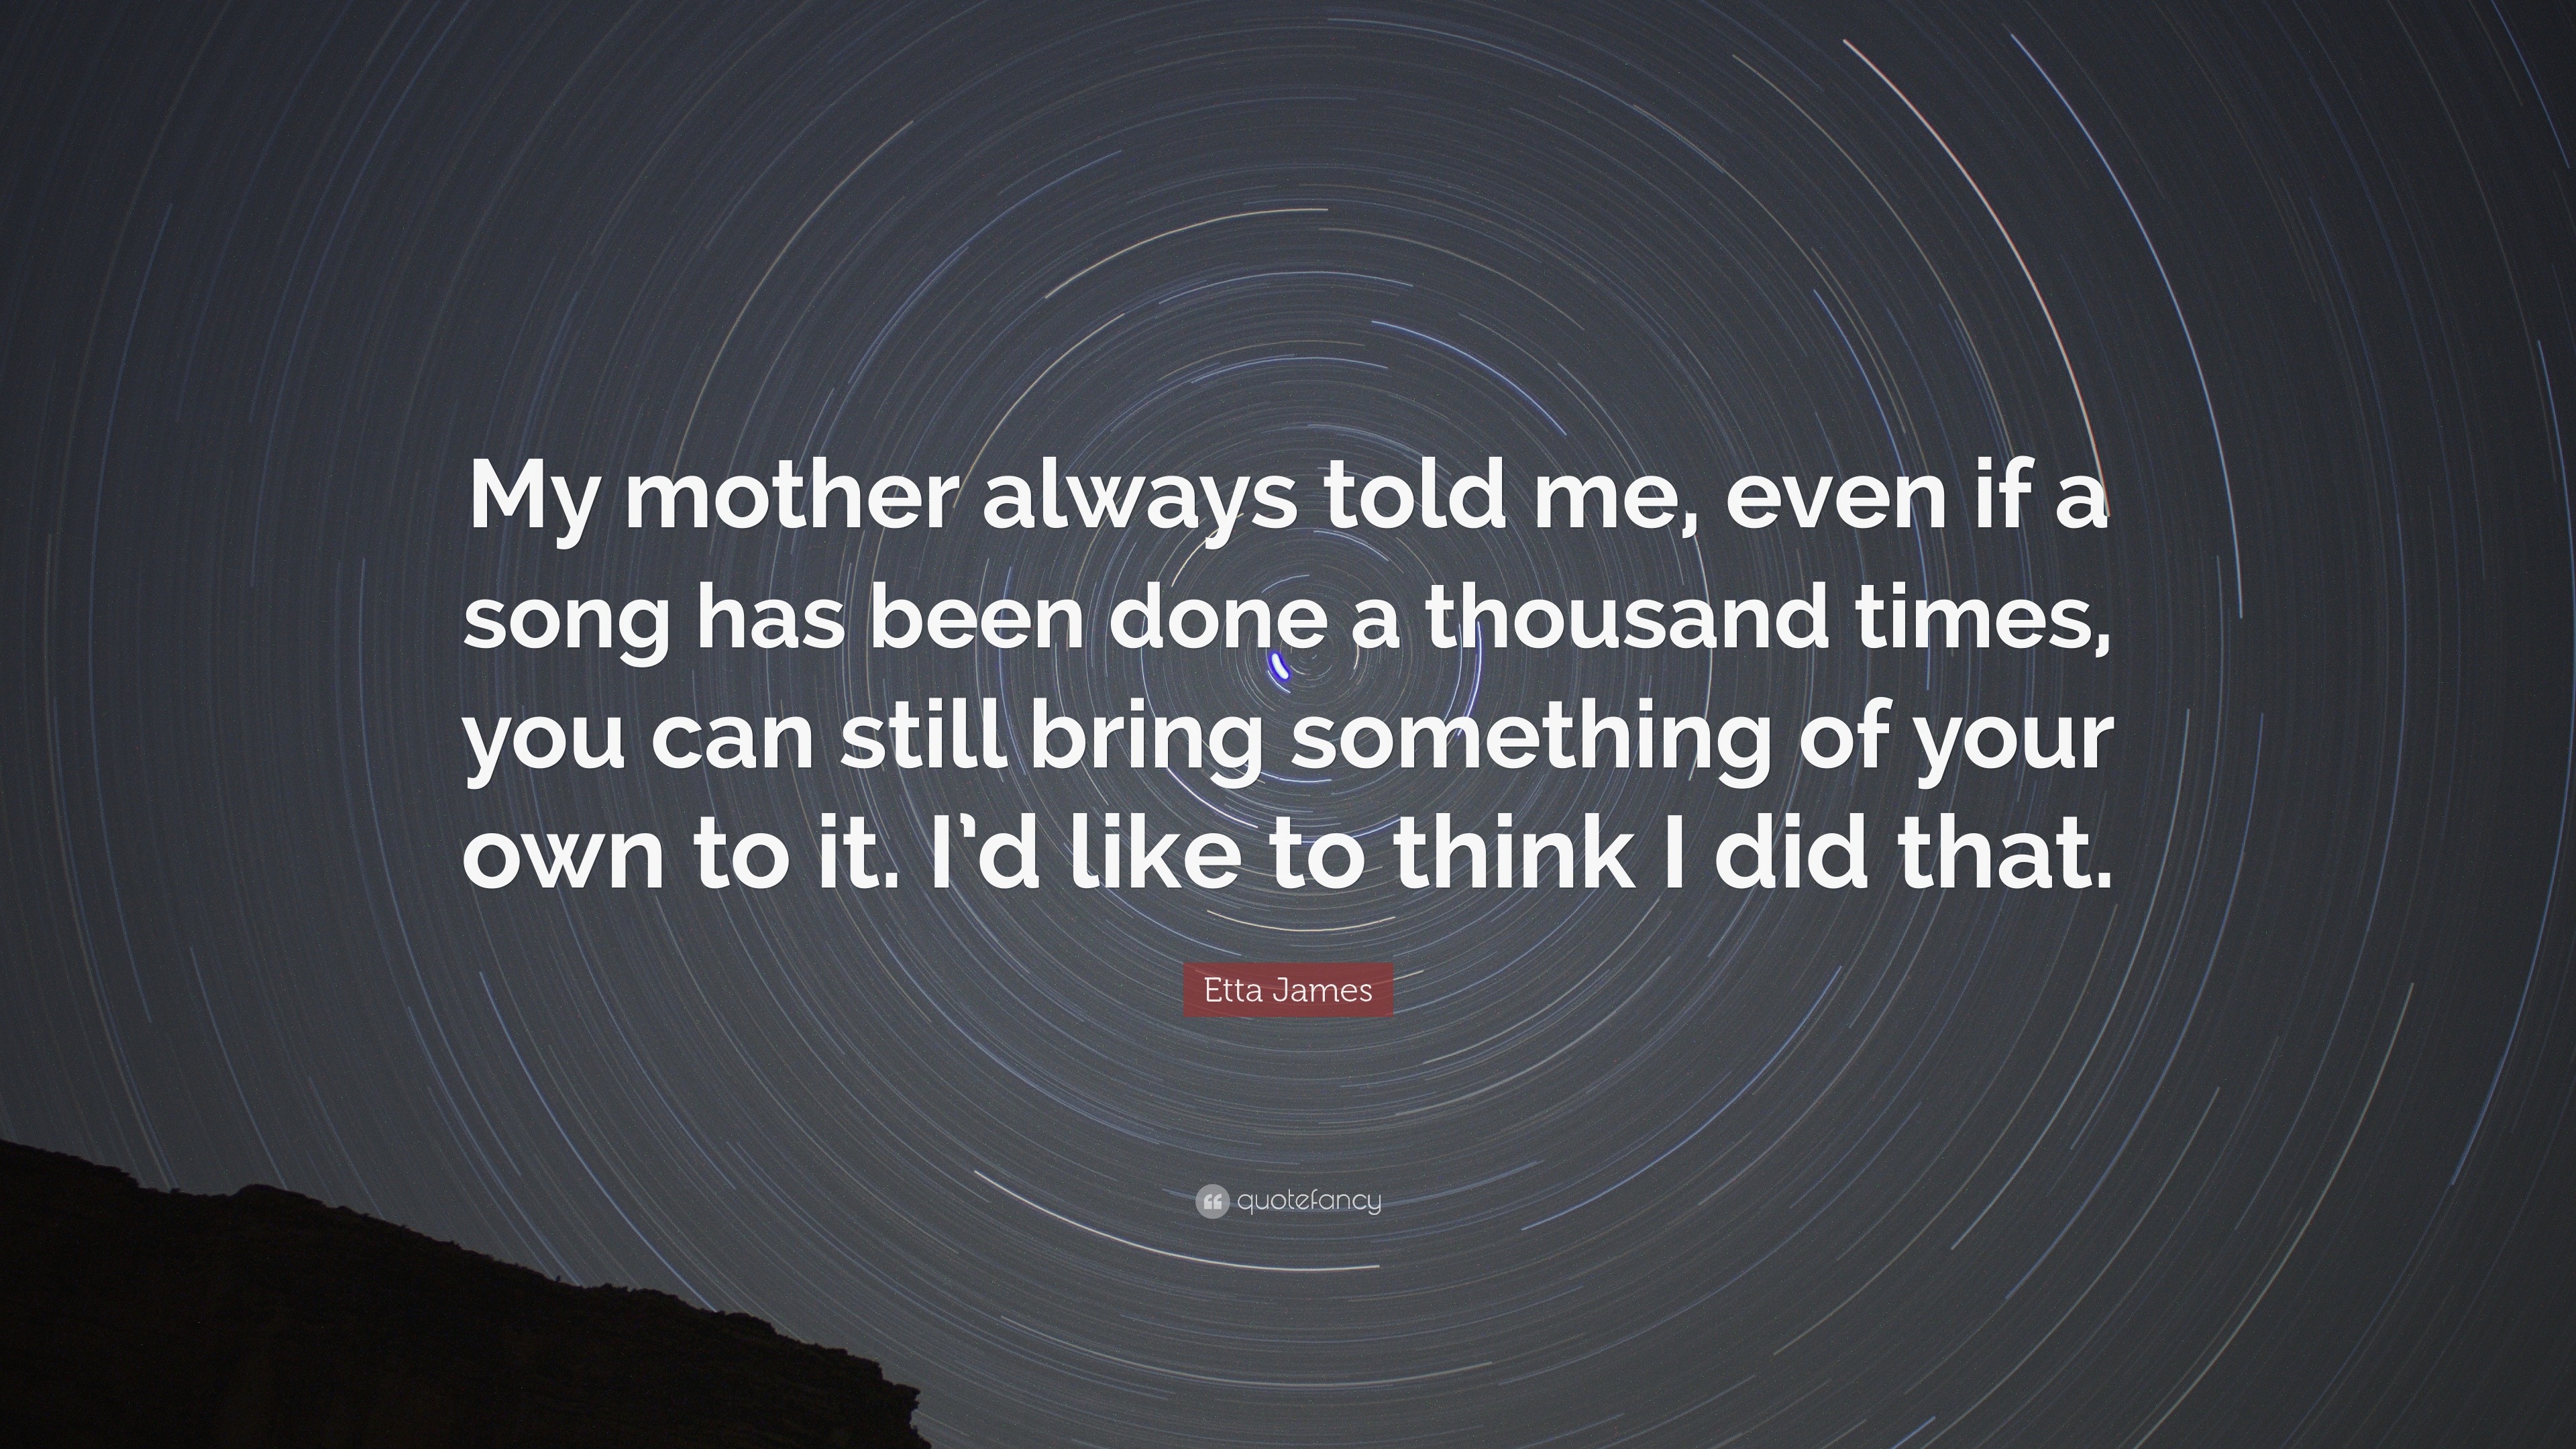 Etta James Quote: “My mother always told me, even if a song has been ...